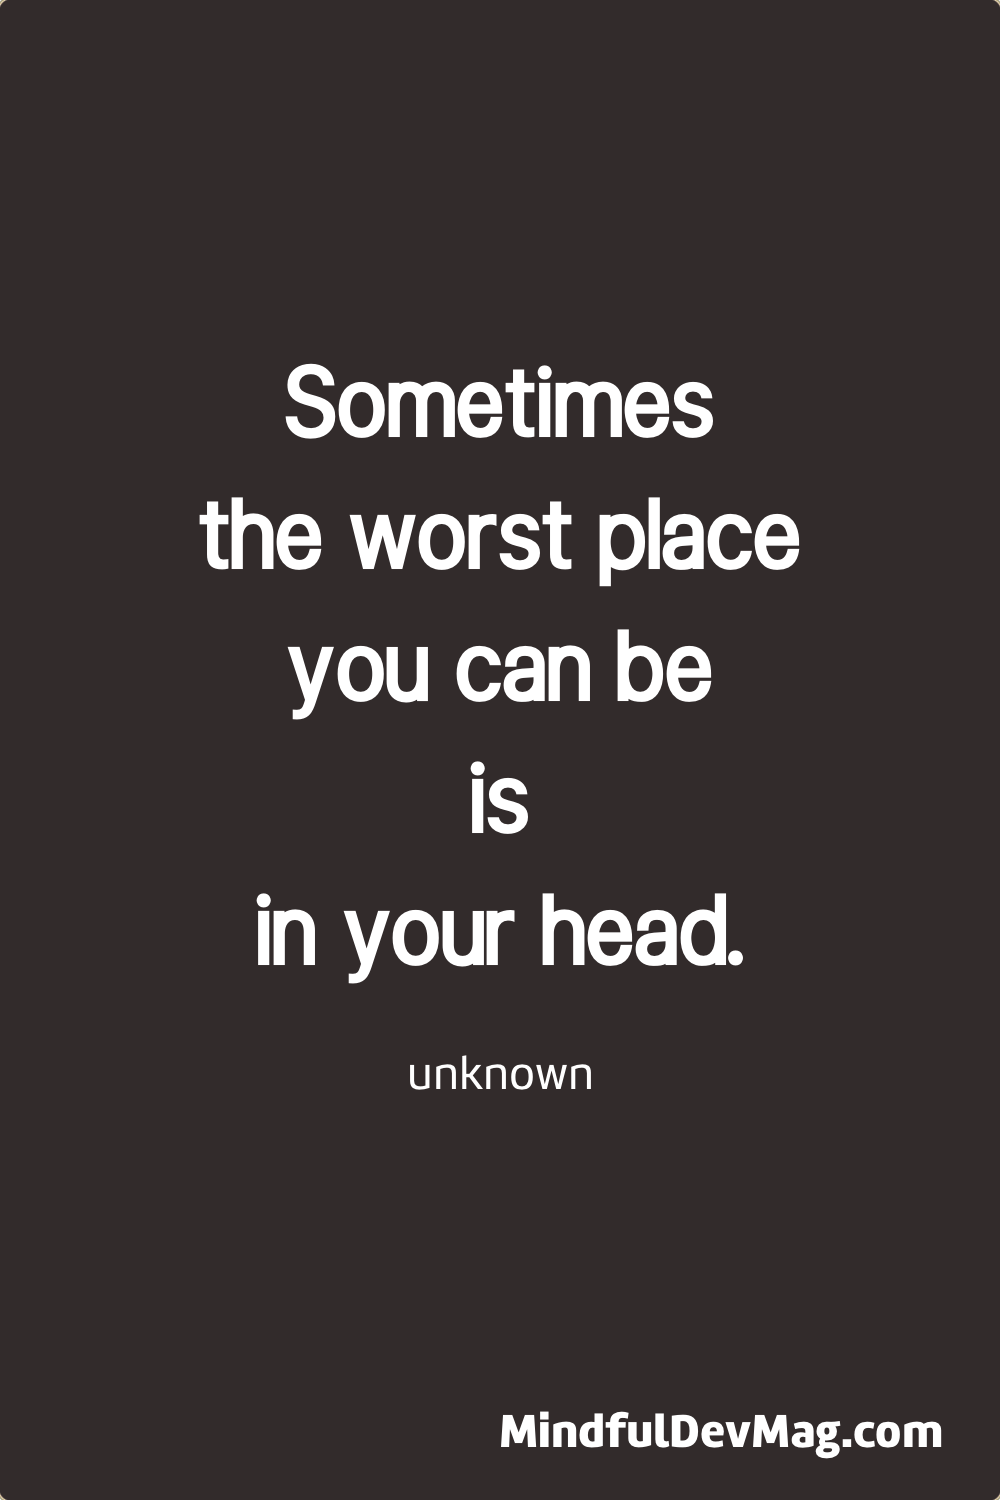 Mindful quote: Sometimes the worst place you can be is in your head. - unknown